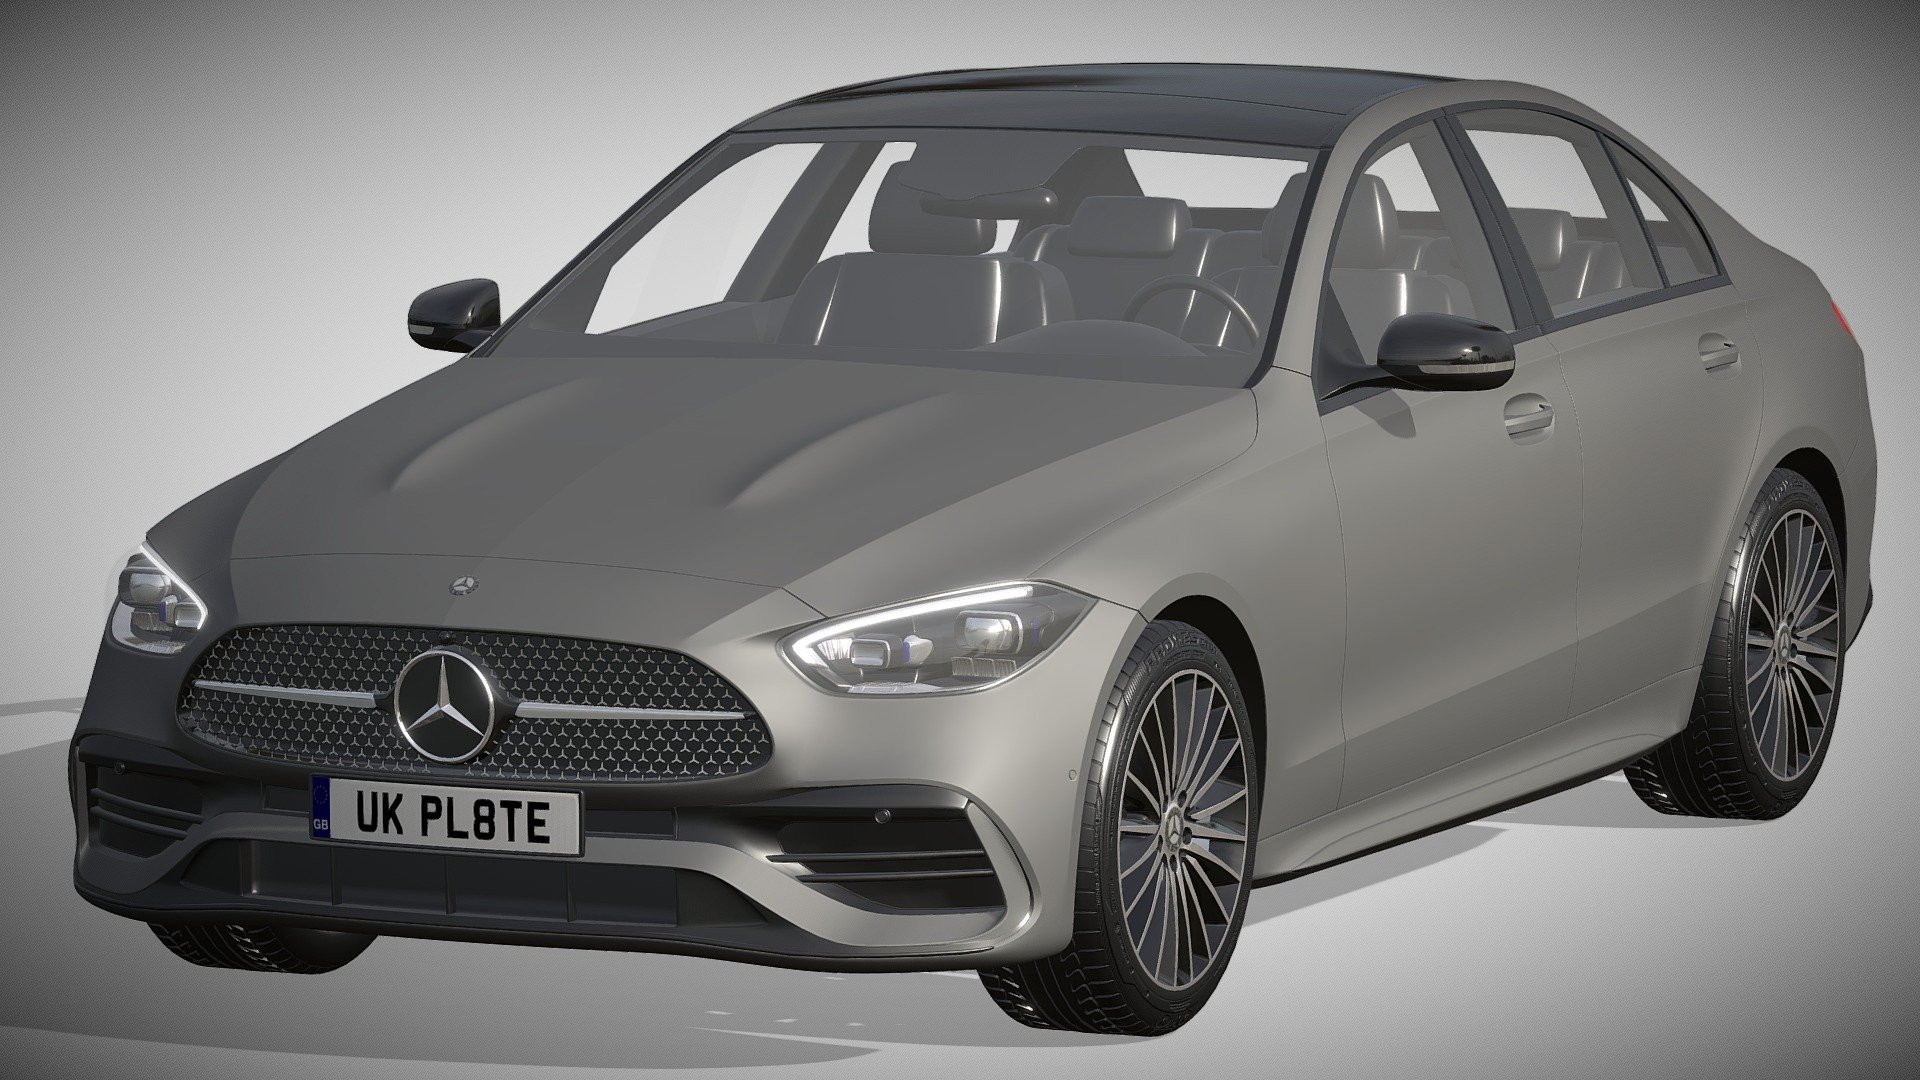 Mercedes-Benz C-Class 2022

https://www.mercedes-benz.de/passengercars/mercedes-benz-cars/models/c-class/saloon-w206/explore.html

Clean geometry Light weight model, yet completely detailed for HI-Res renders. Use for movies, Advertisements or games

Corona render and materials

All textures include in *.rar files

Lighting setup is not included in the file! - Mercedes-Benz C-Class 2022 - Buy Royalty Free 3D model by zifir3d 3d model